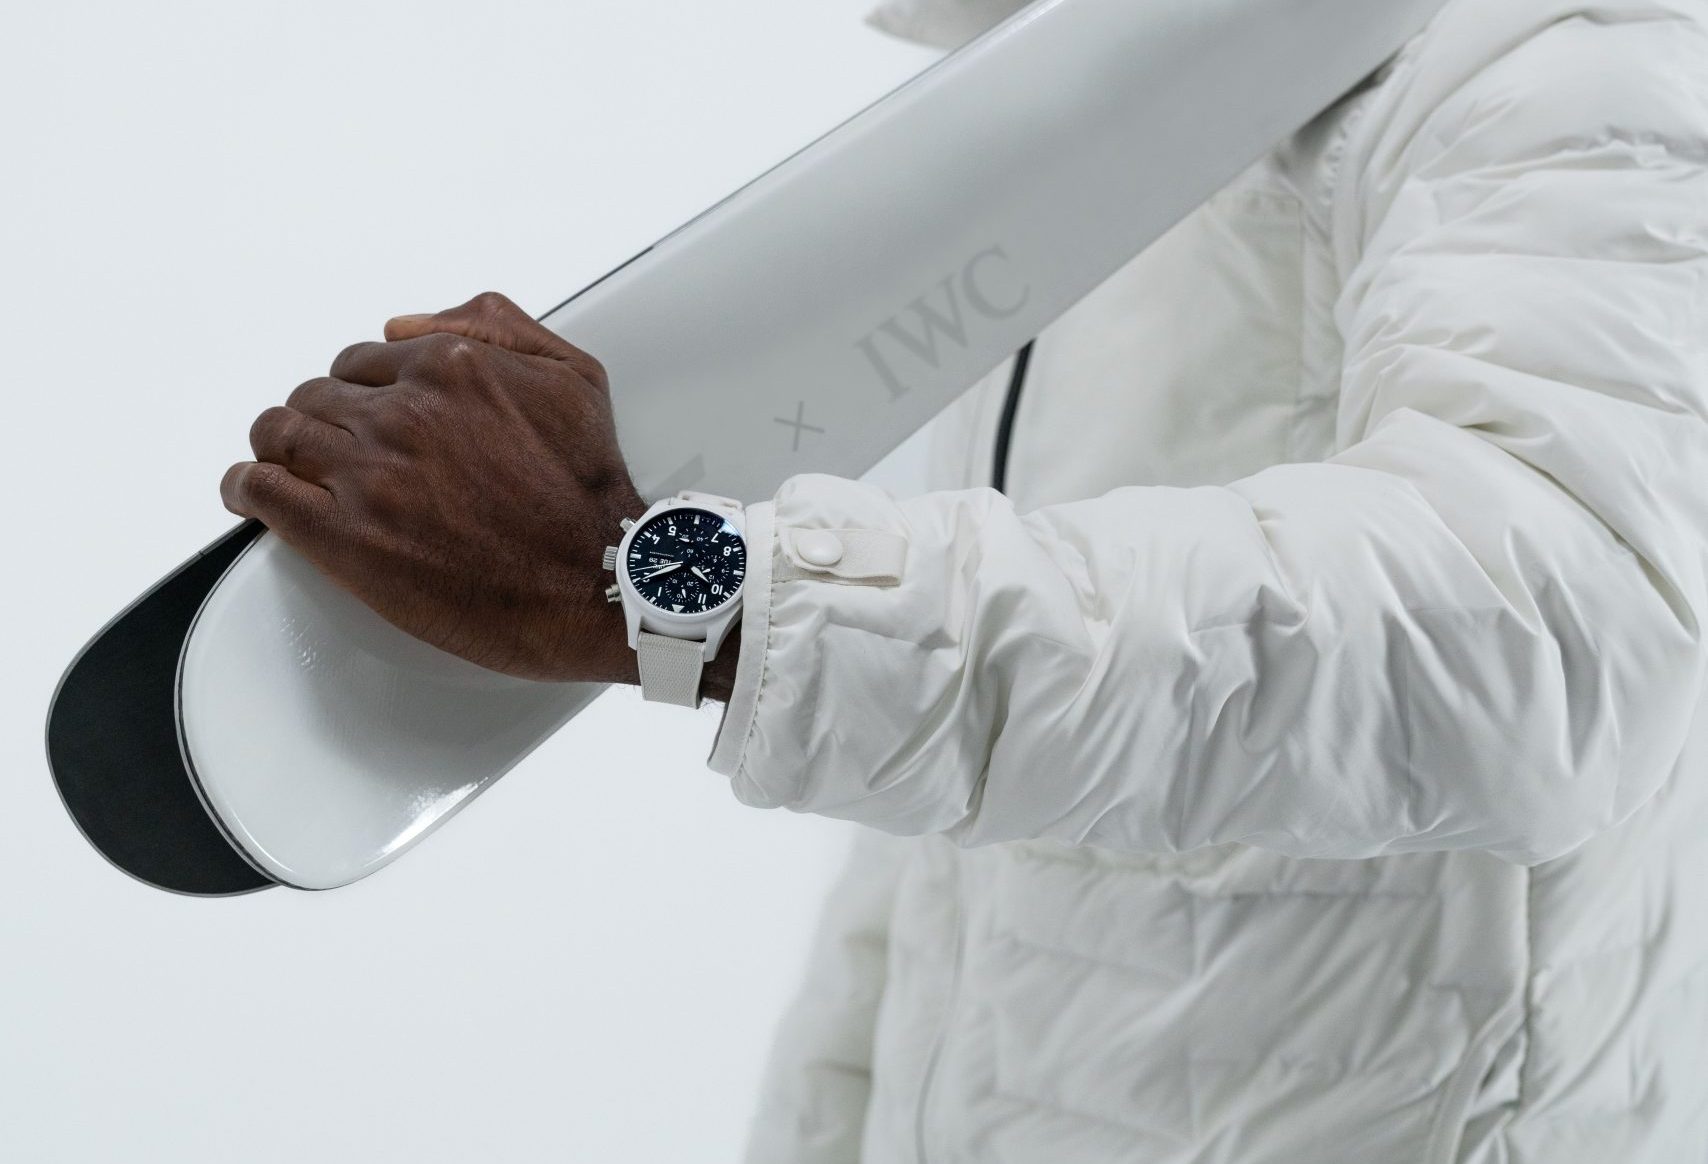 Engineering for the future: Eileen Gu and IWC Schaffhausen host a